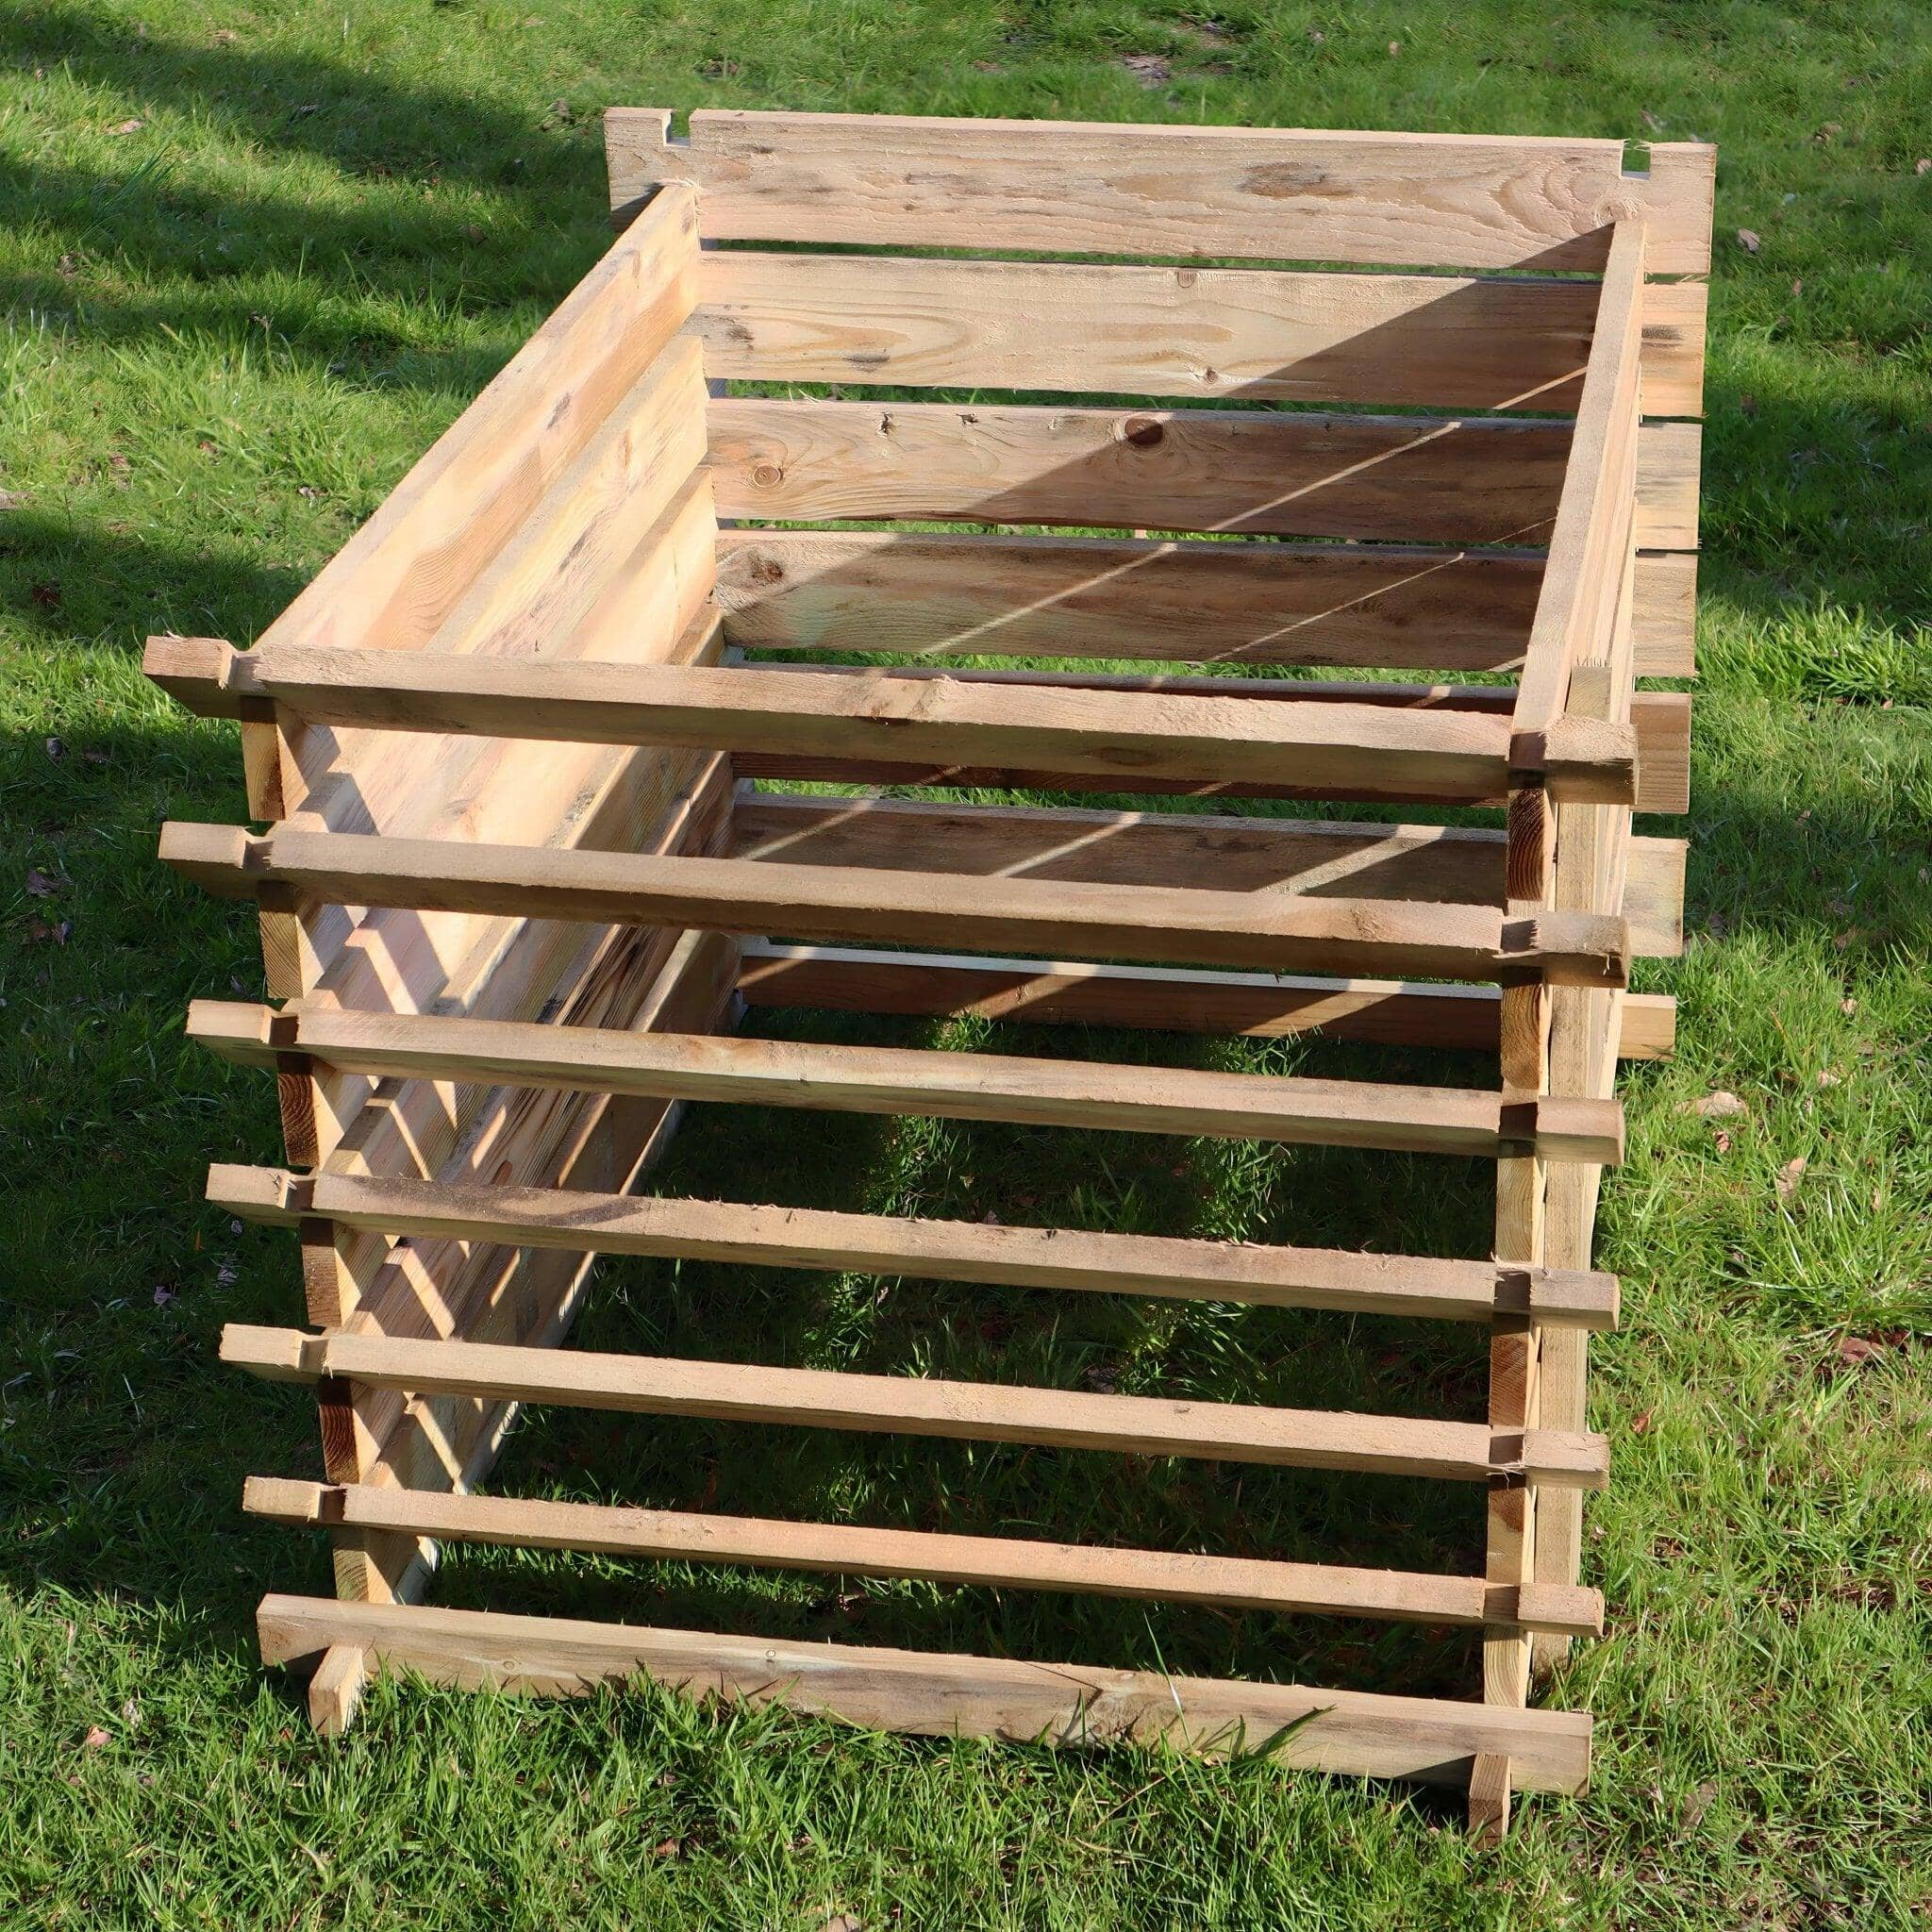 Easy Fill Wooden Compost Bin Composter 897 Litres by Woven Wood™ - Woven Wood